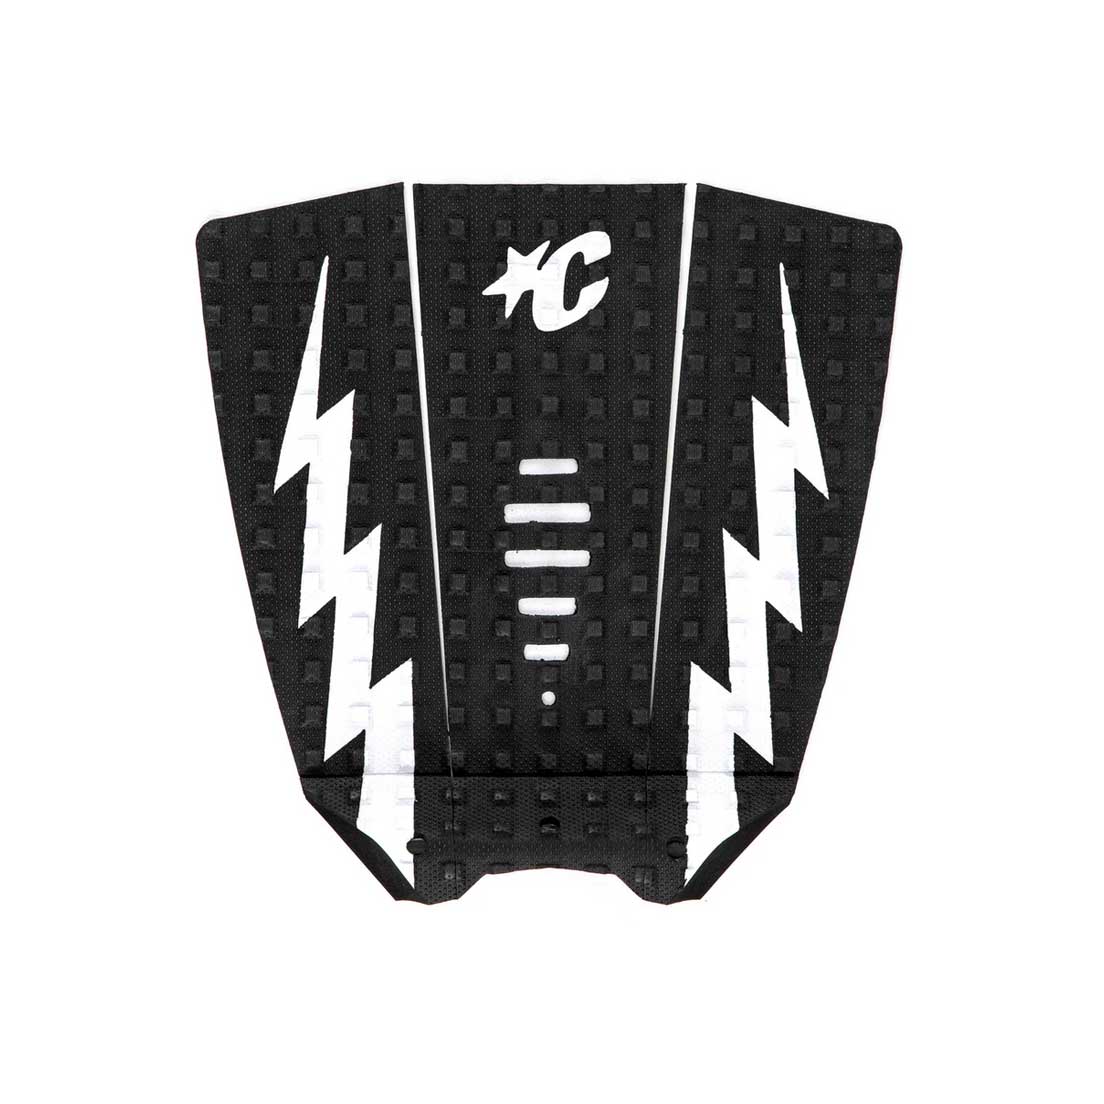 Traction Pad Creatures Mick Eugene Fanning Grom Lite – Black White